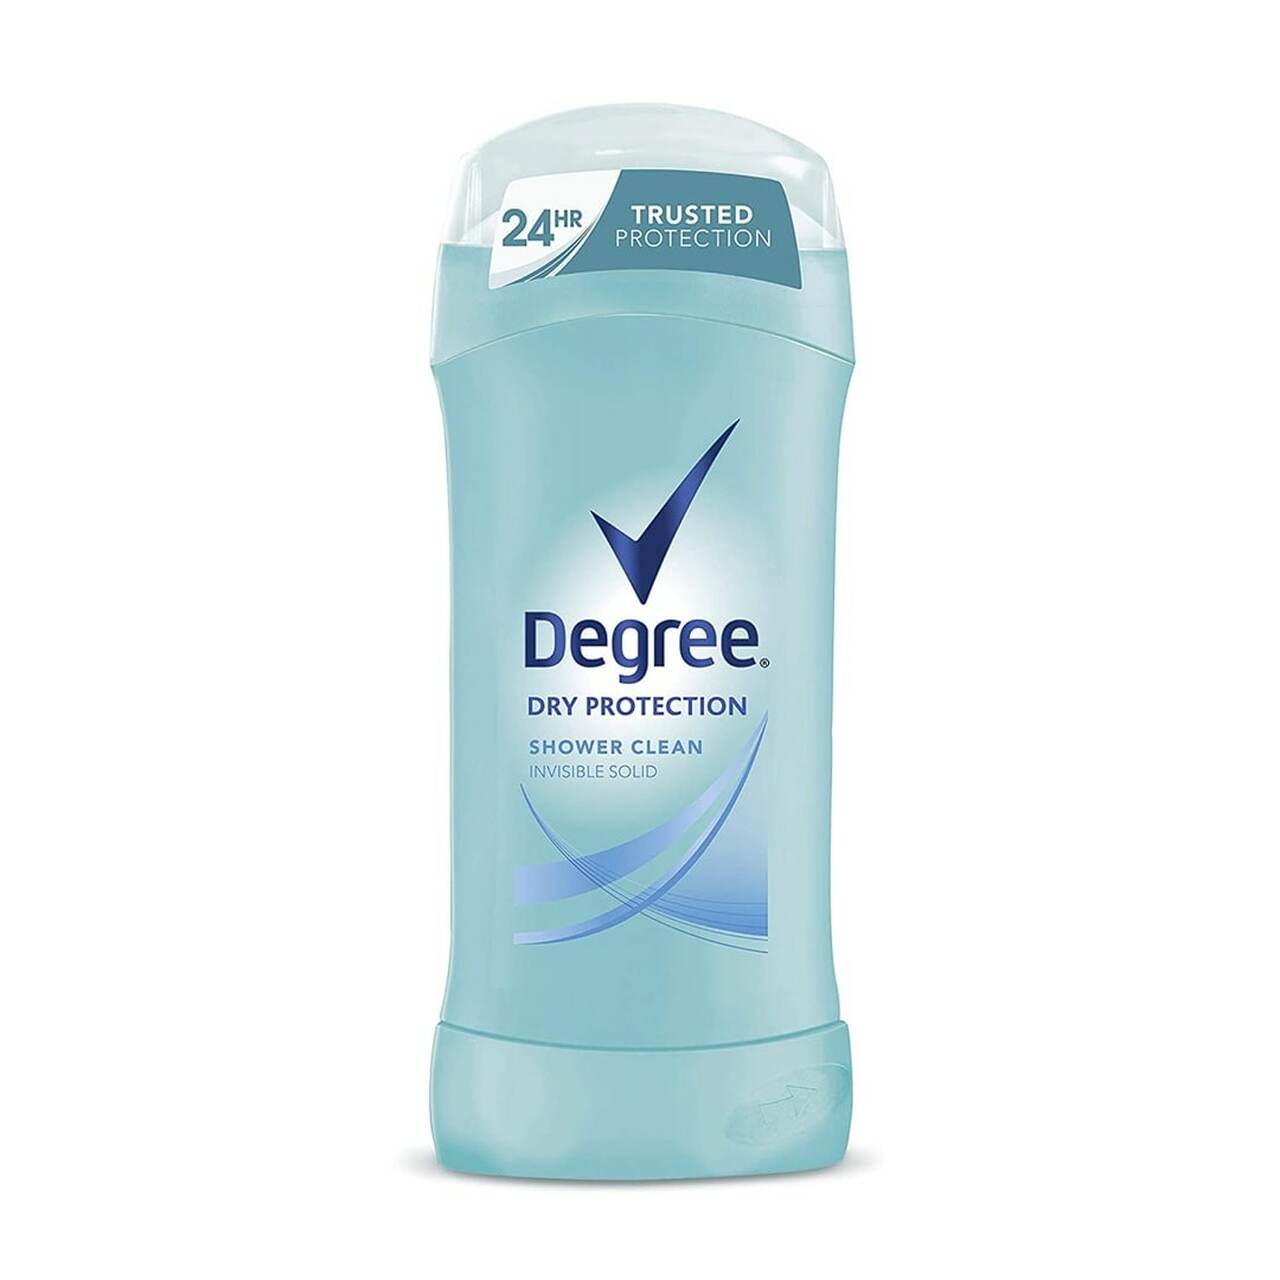 Degree Women Dry Protection Shower Clean - Best Deodorant For Smelly Armpits and Body Odor